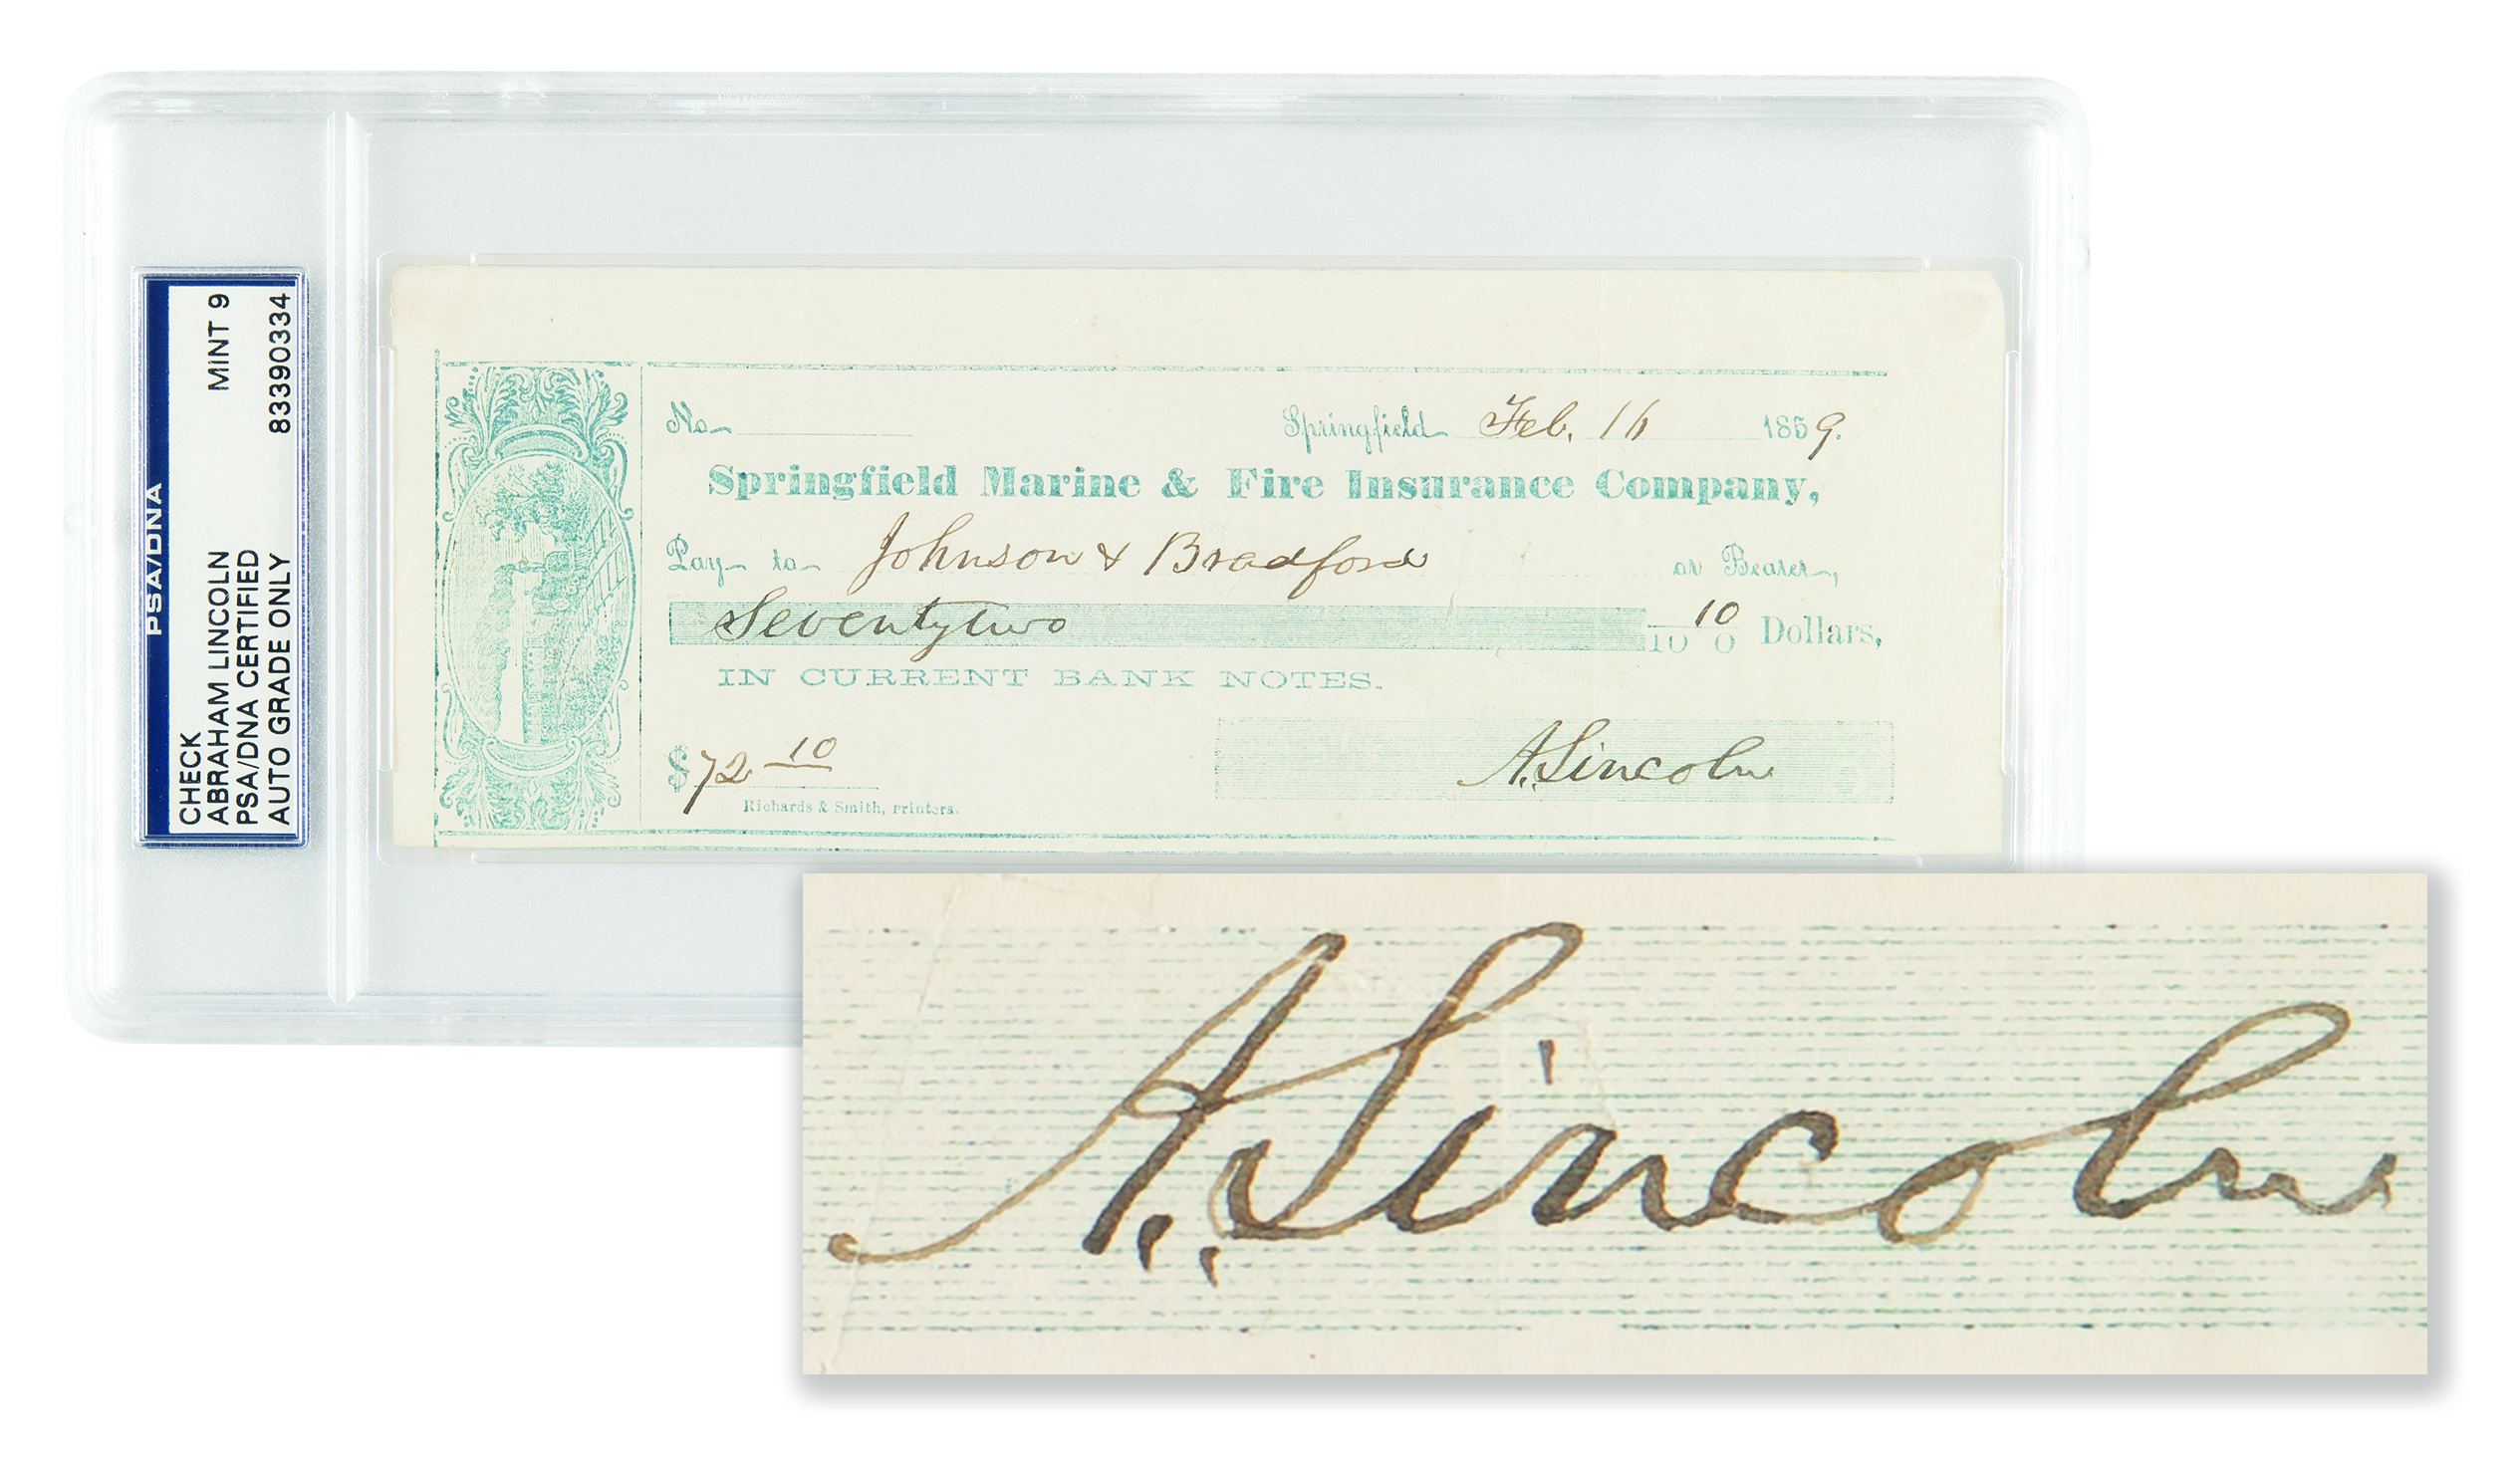 Lot #18 Abraham Lincoln Signed Check - PSA MINT 9 - to a Springfield book publisher, who he approached about publishing his historic debates with Stephen Douglas - Image 1